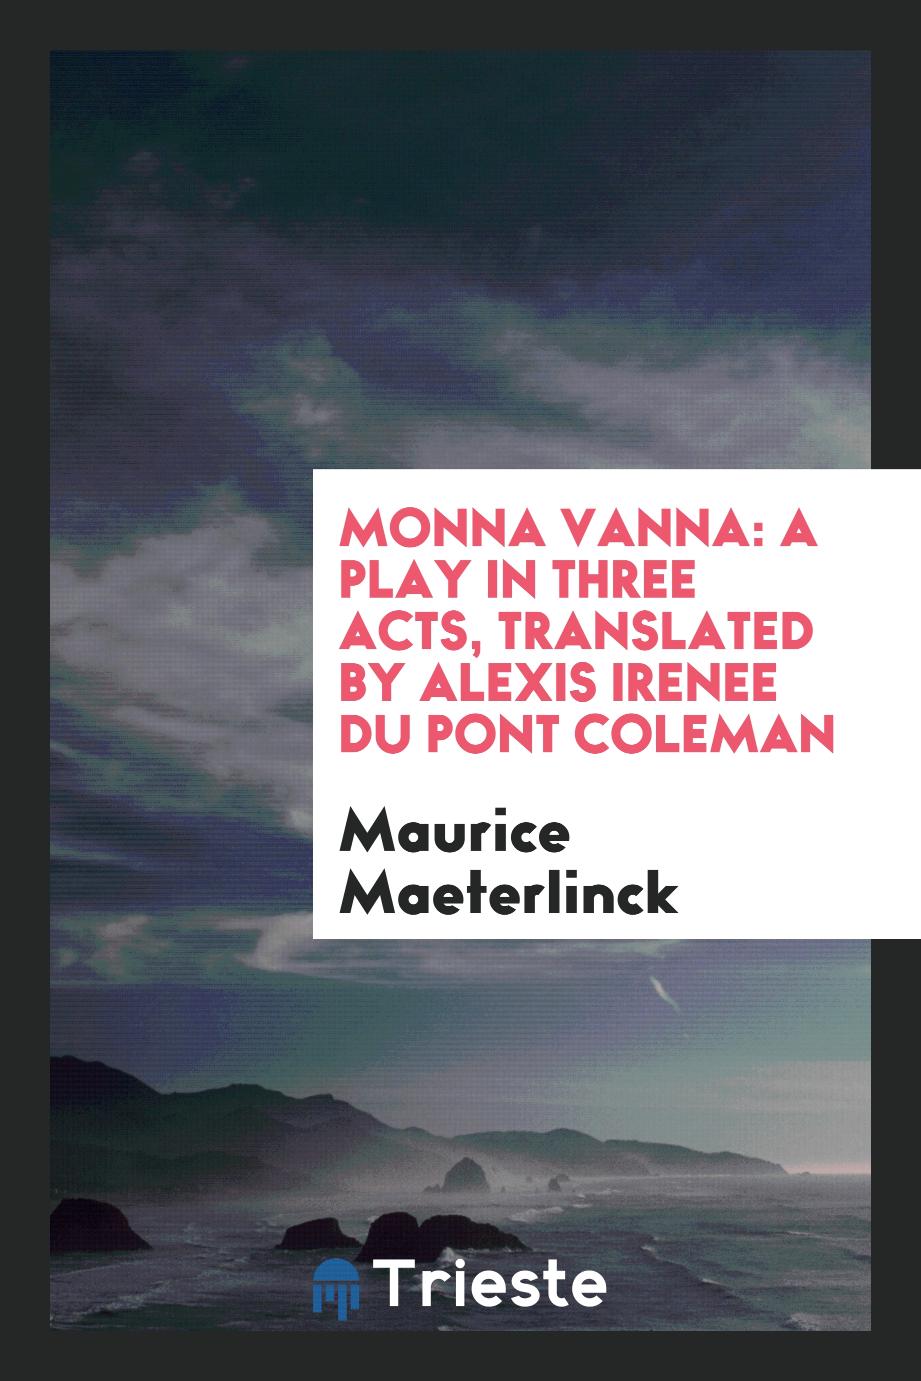 Monna Vanna: a play in three acts, translated by Alexis Irenee Du Pont Coleman